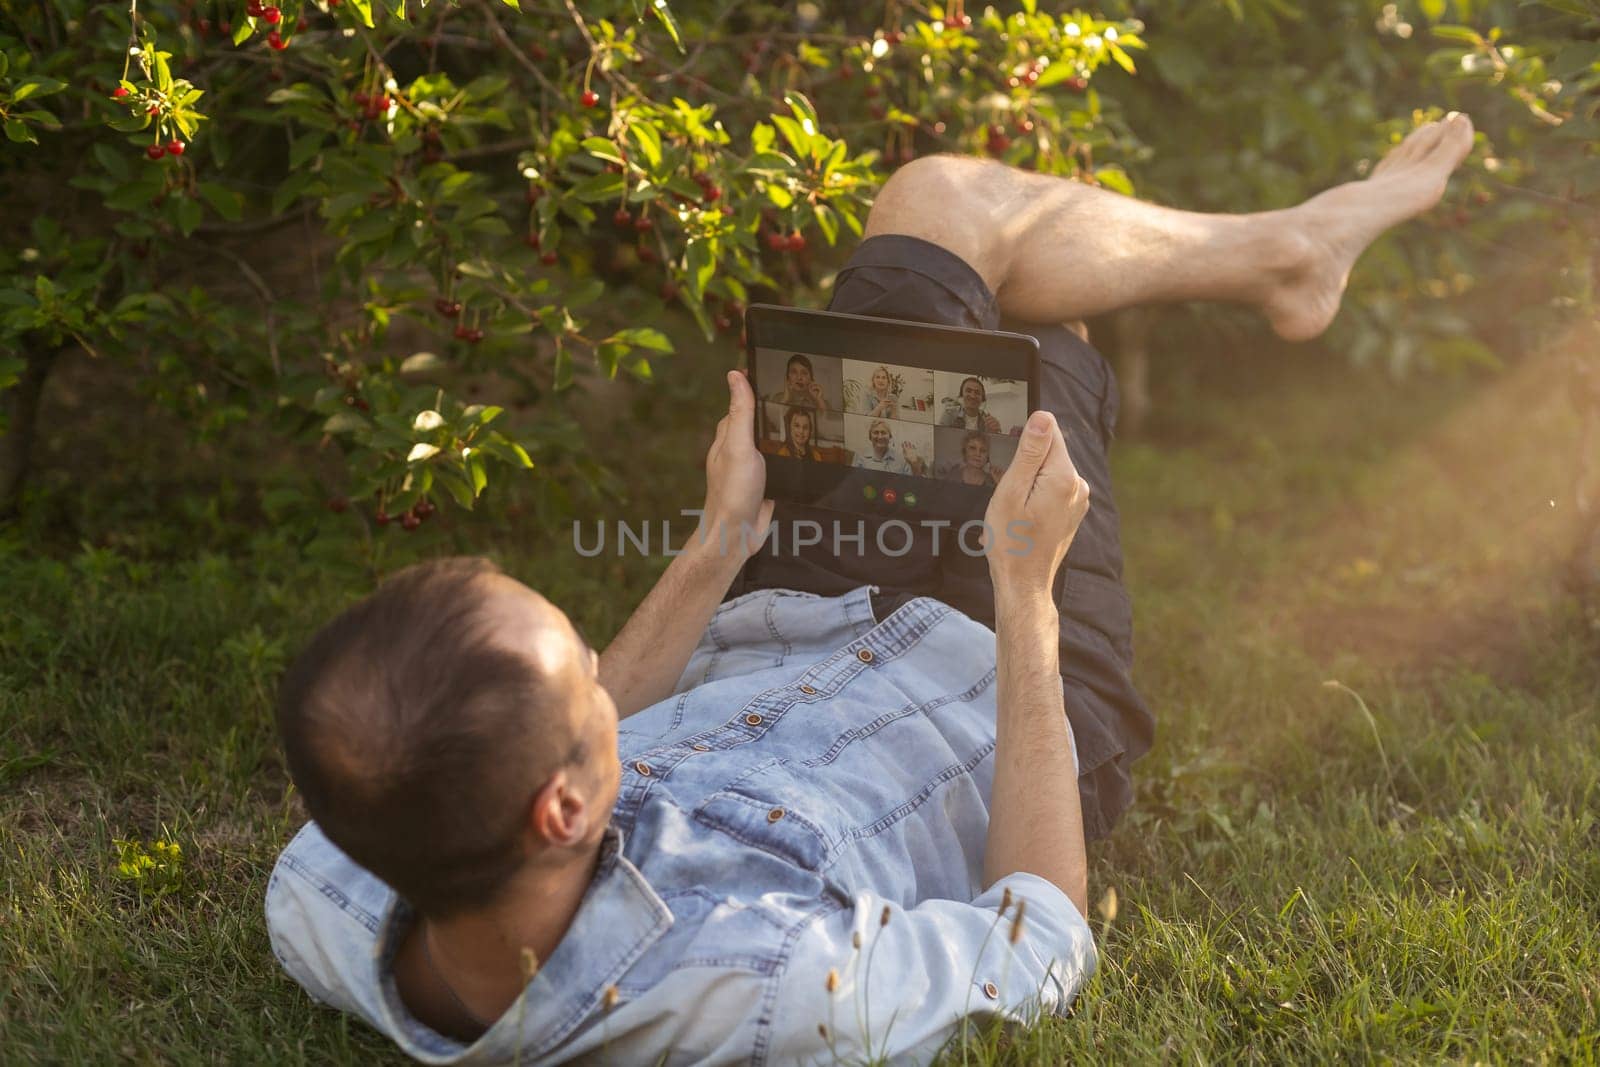 a man uses a tablet to chat in the garden by Andelov13